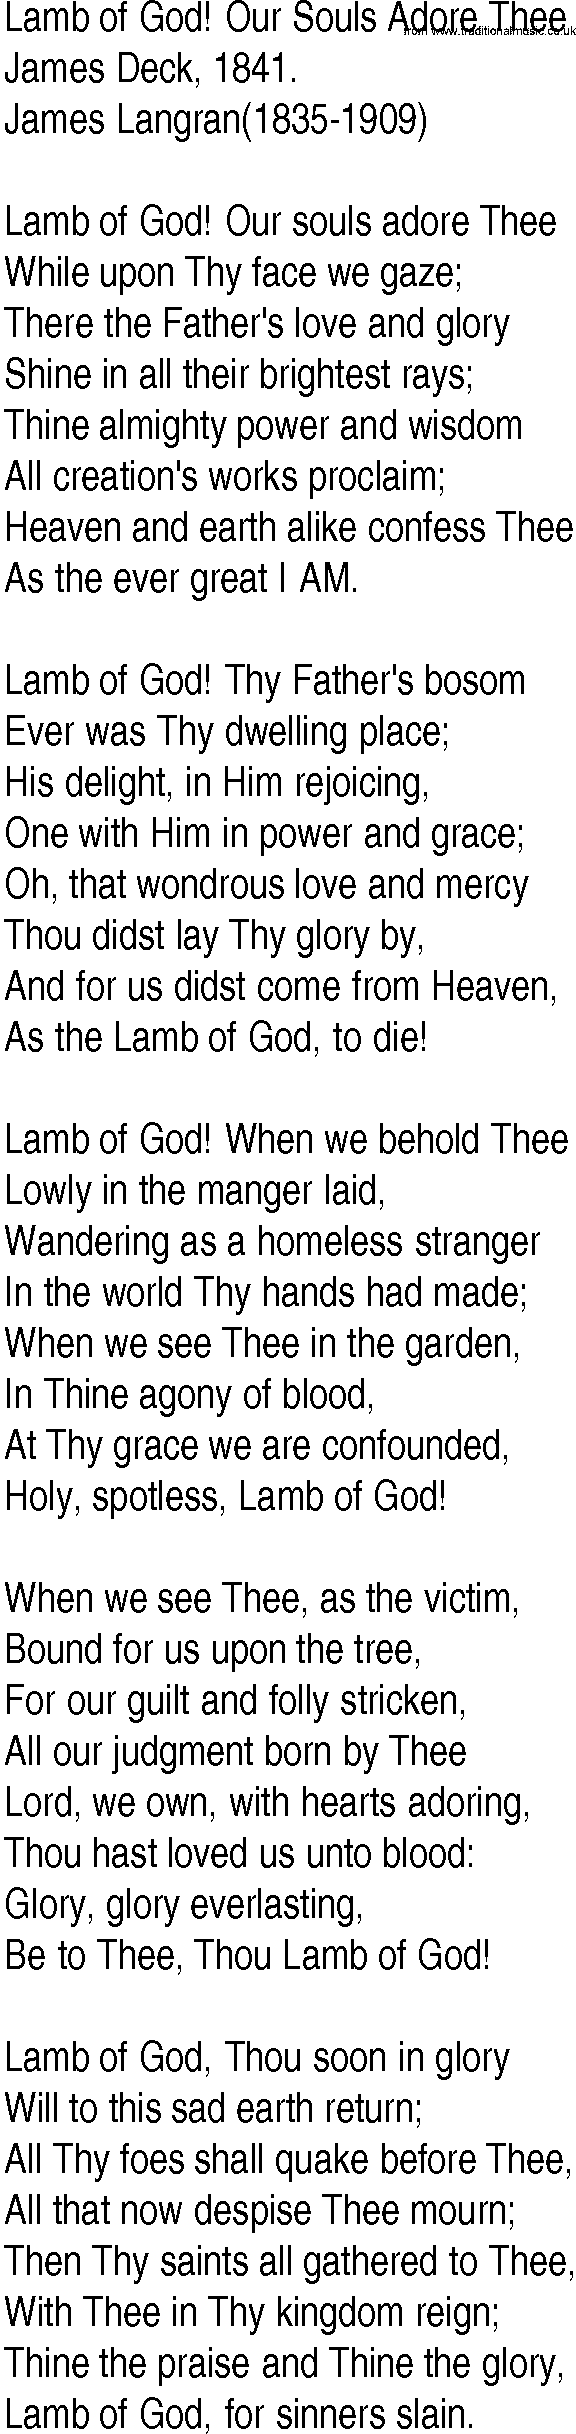 Hymn and Gospel Song: Lamb of God! Our Souls Adore Thee by James Deck lyrics